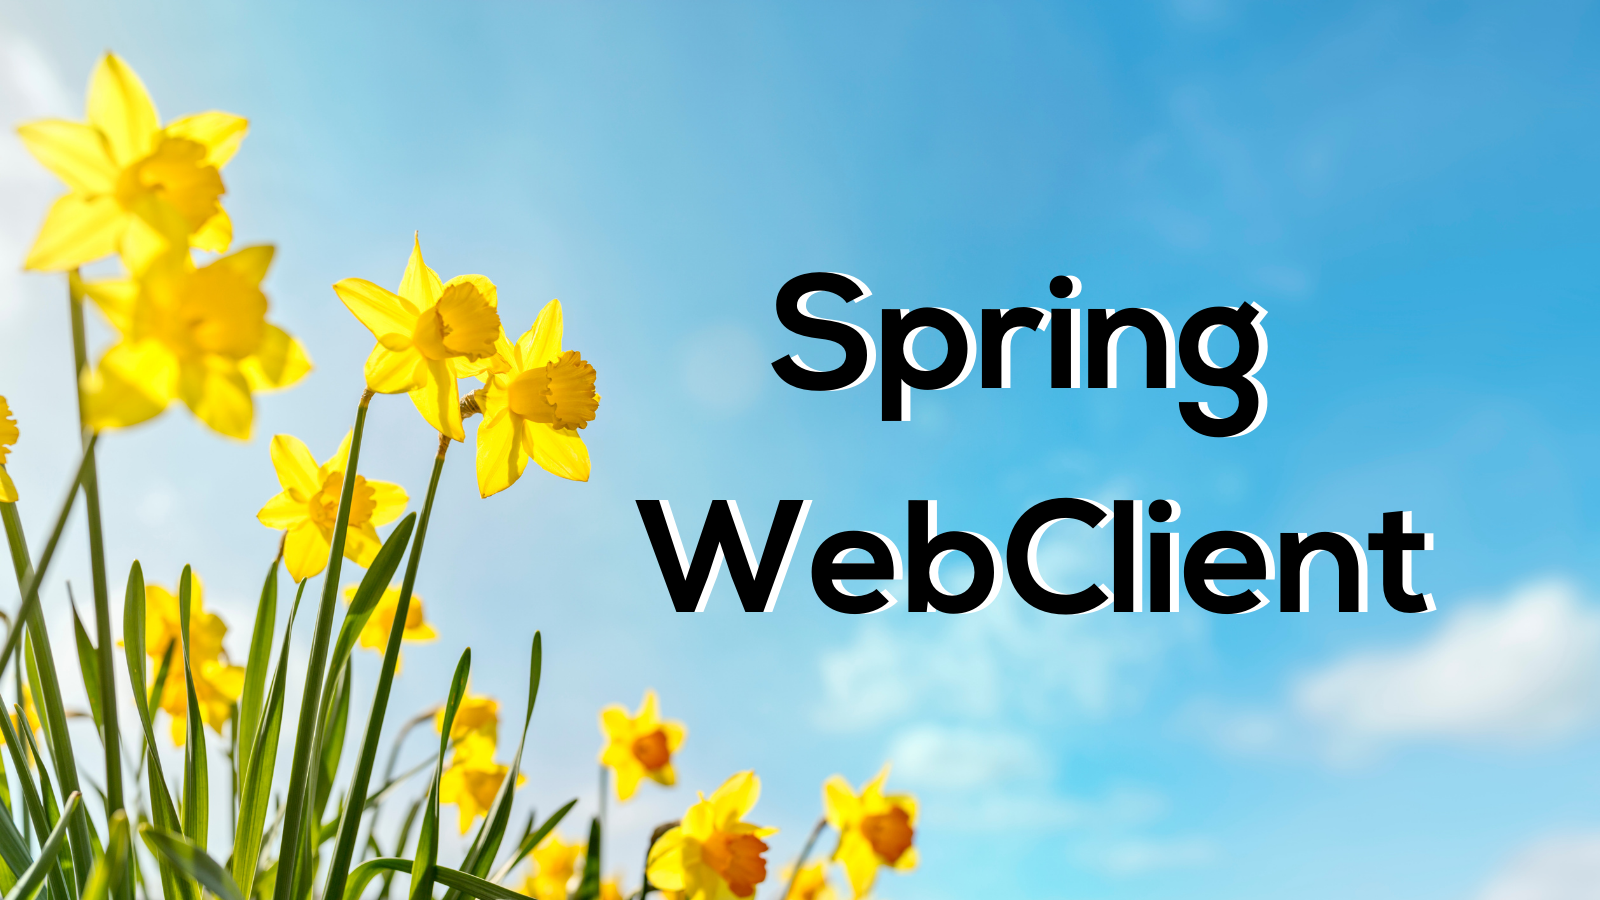 Spring WebClient for Easy Access to OAuth 2.0 Protected Resources